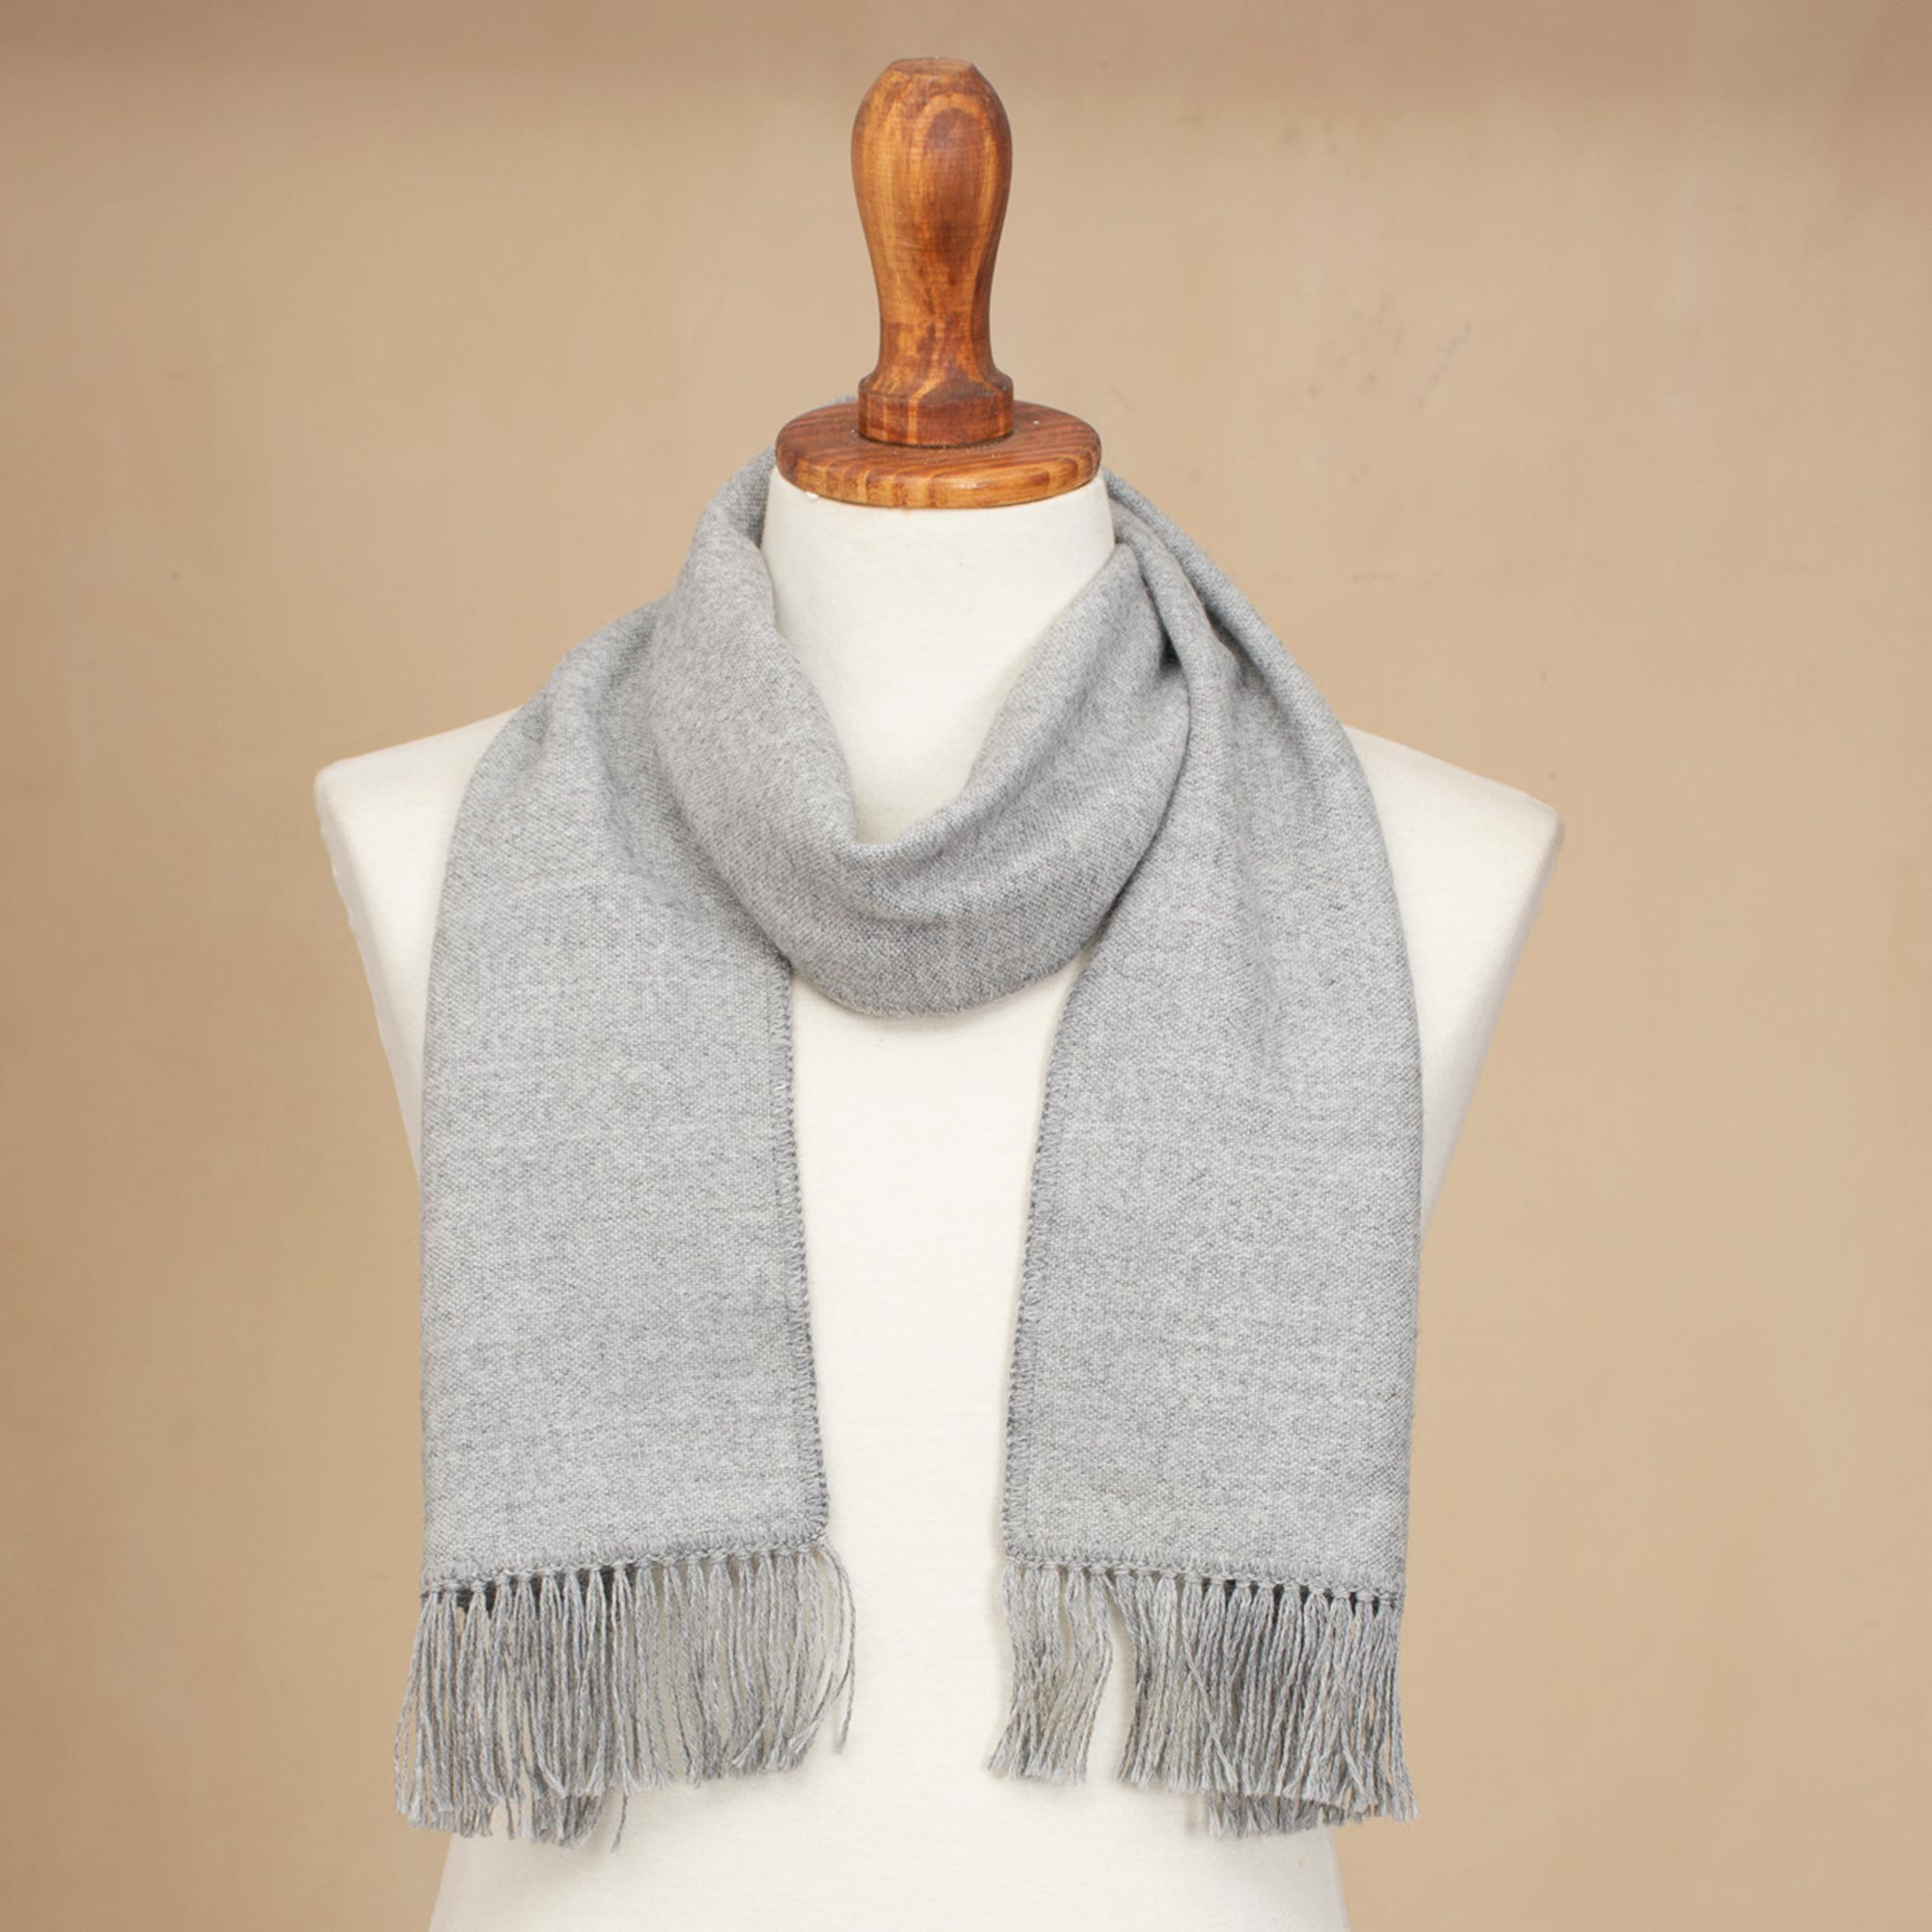 Artisan Crafted Alpaca Blend Scarf in Smoke from Peru - Winter Chic in ...